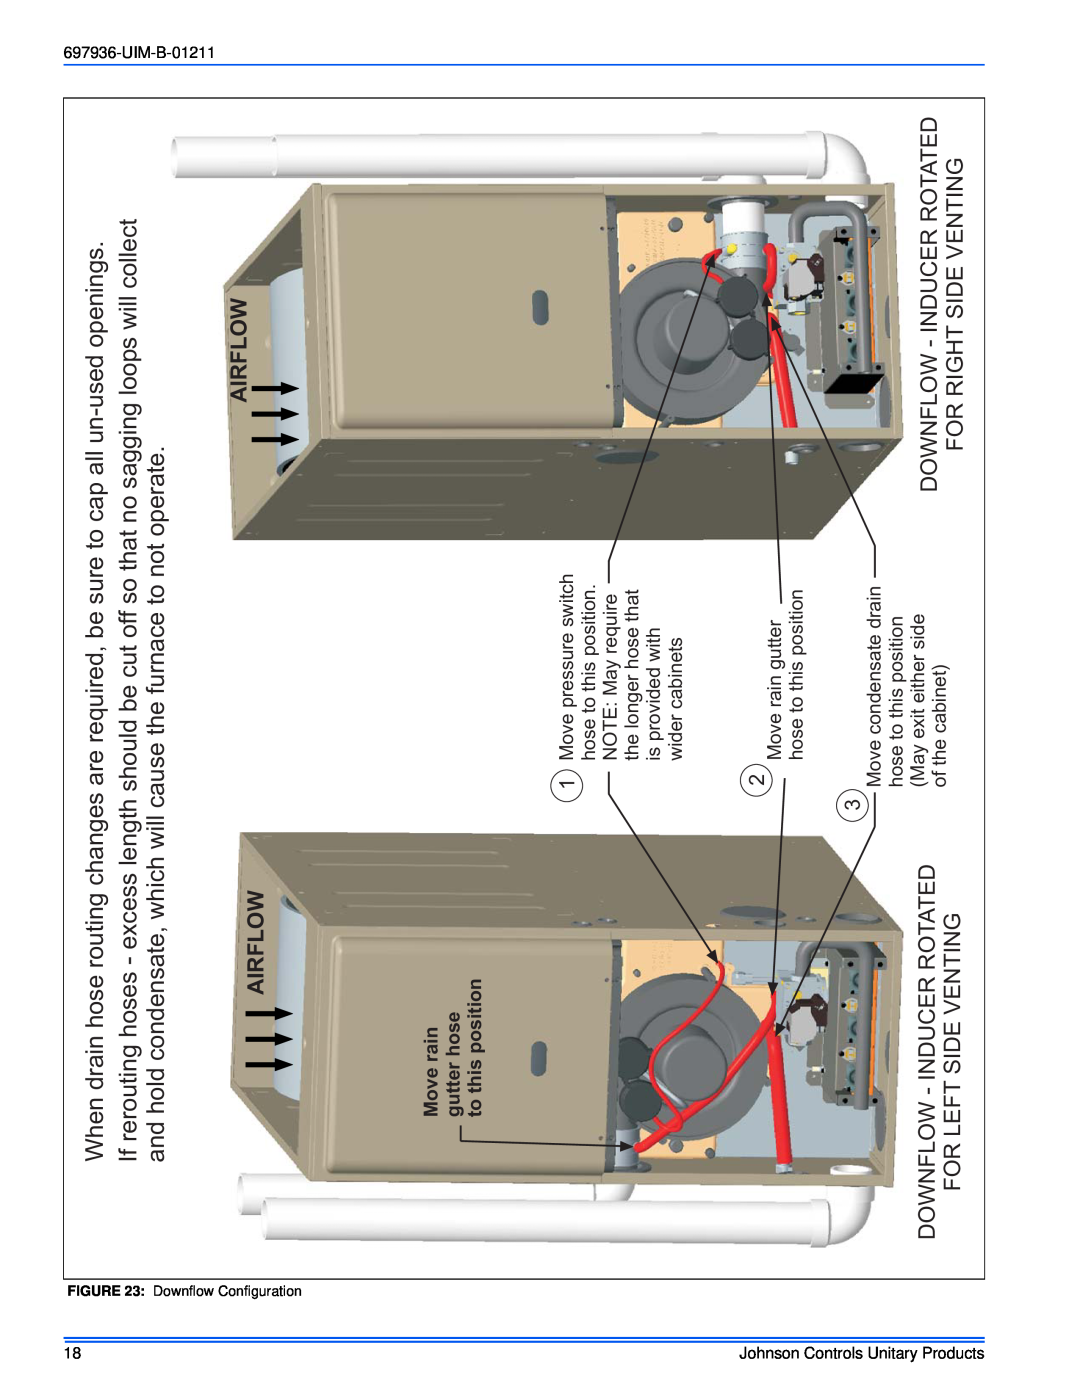 Johnson Controls TM9X*MP installation manual Airflow Airflow, Downflow - Inducer Rotated For Left Side Venting 